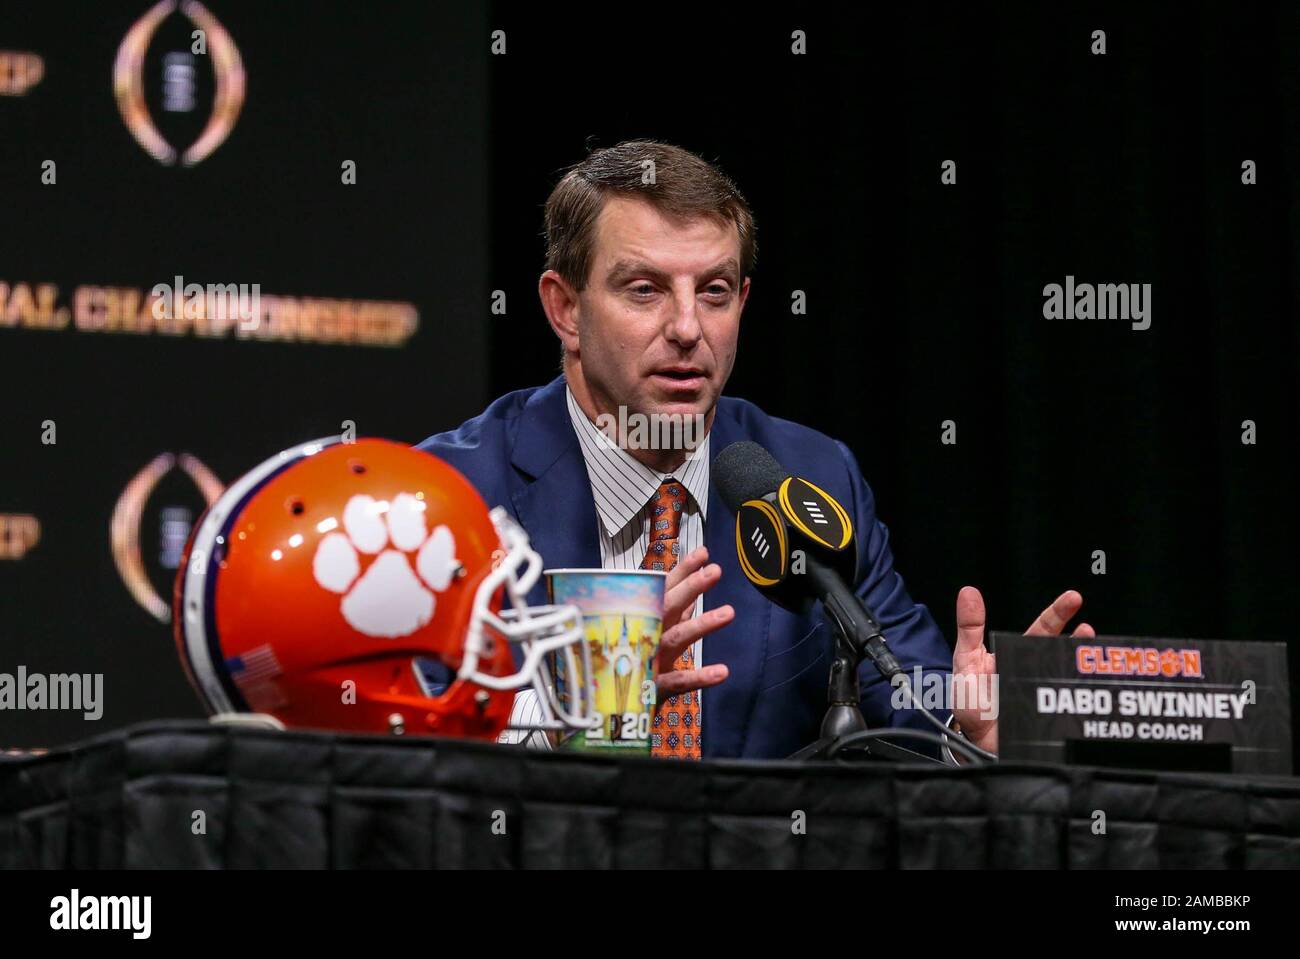 New Orleans, LA, USA. 12th Jan, 2020. Clemson Head Coach Dabo Swinney addresses the media during the Head Coaches Press Conference before the College Football National Championship between the Clemson Tigers and the LSU Tigers at the Sheraton Hotel in New Orleans, LA. Jonathan Mailhes/CSM/Alamy Live News Stock Photo